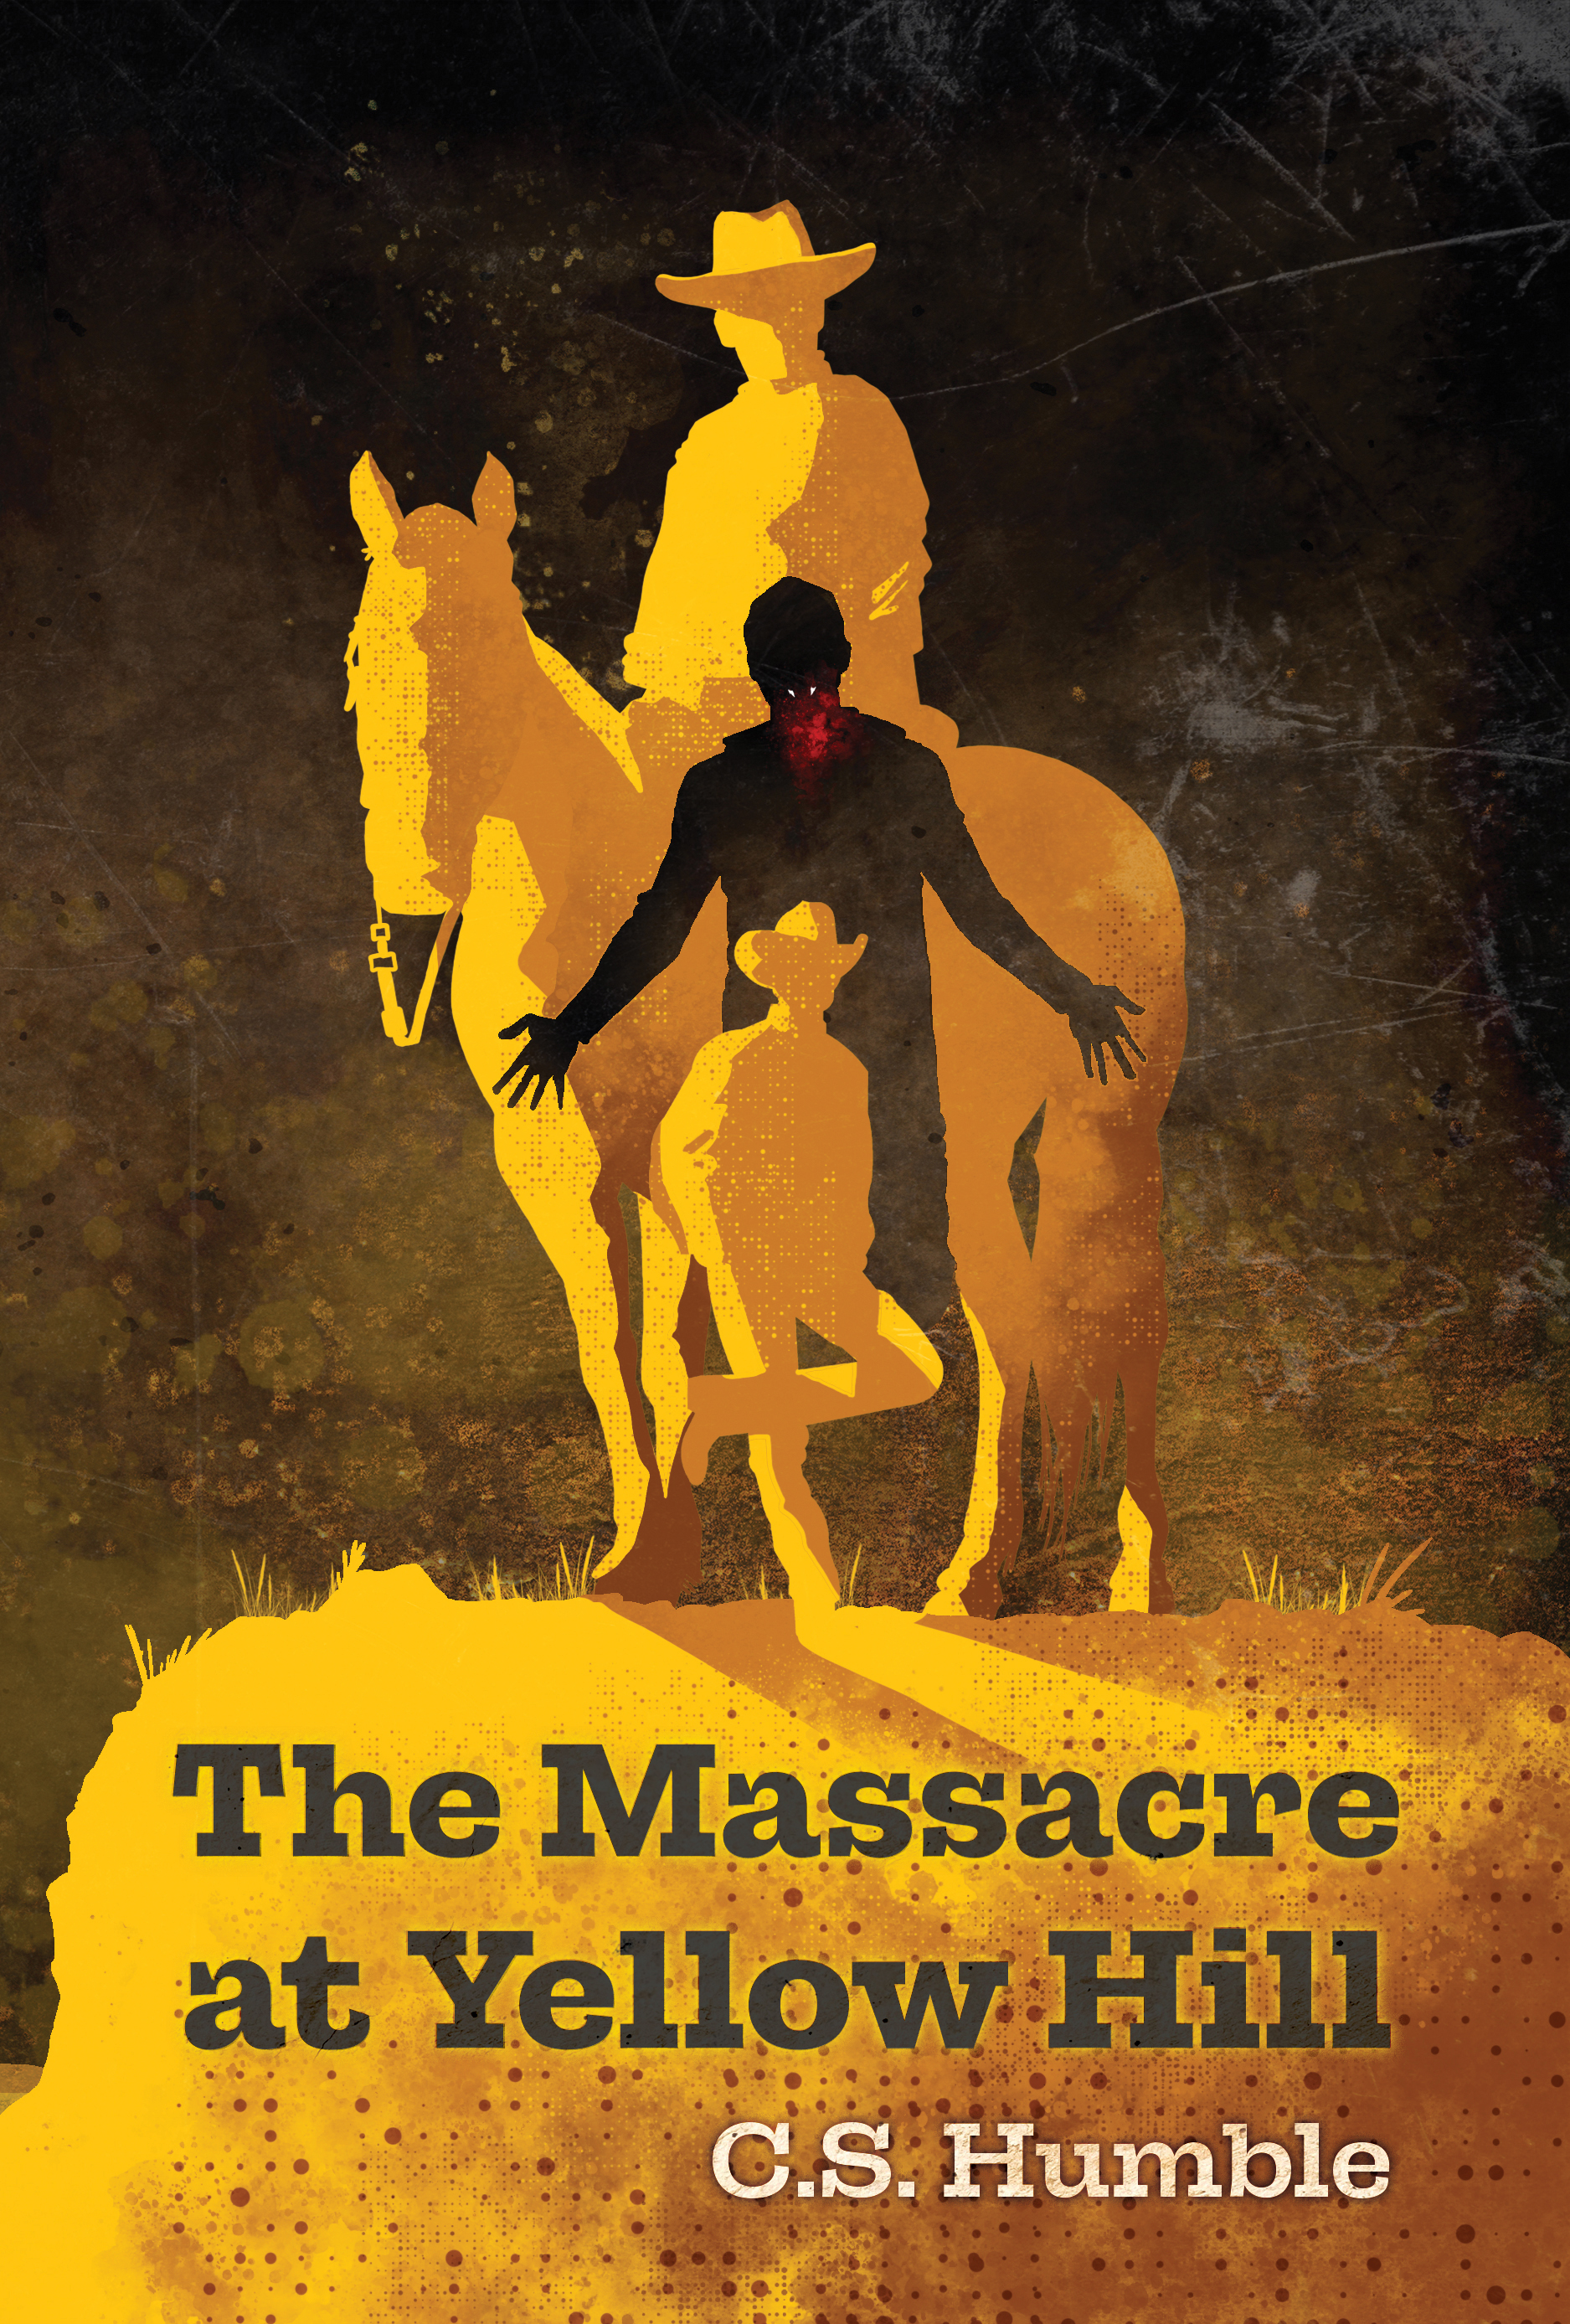 The Massacre at Yellow Hill, by C. S. Humble